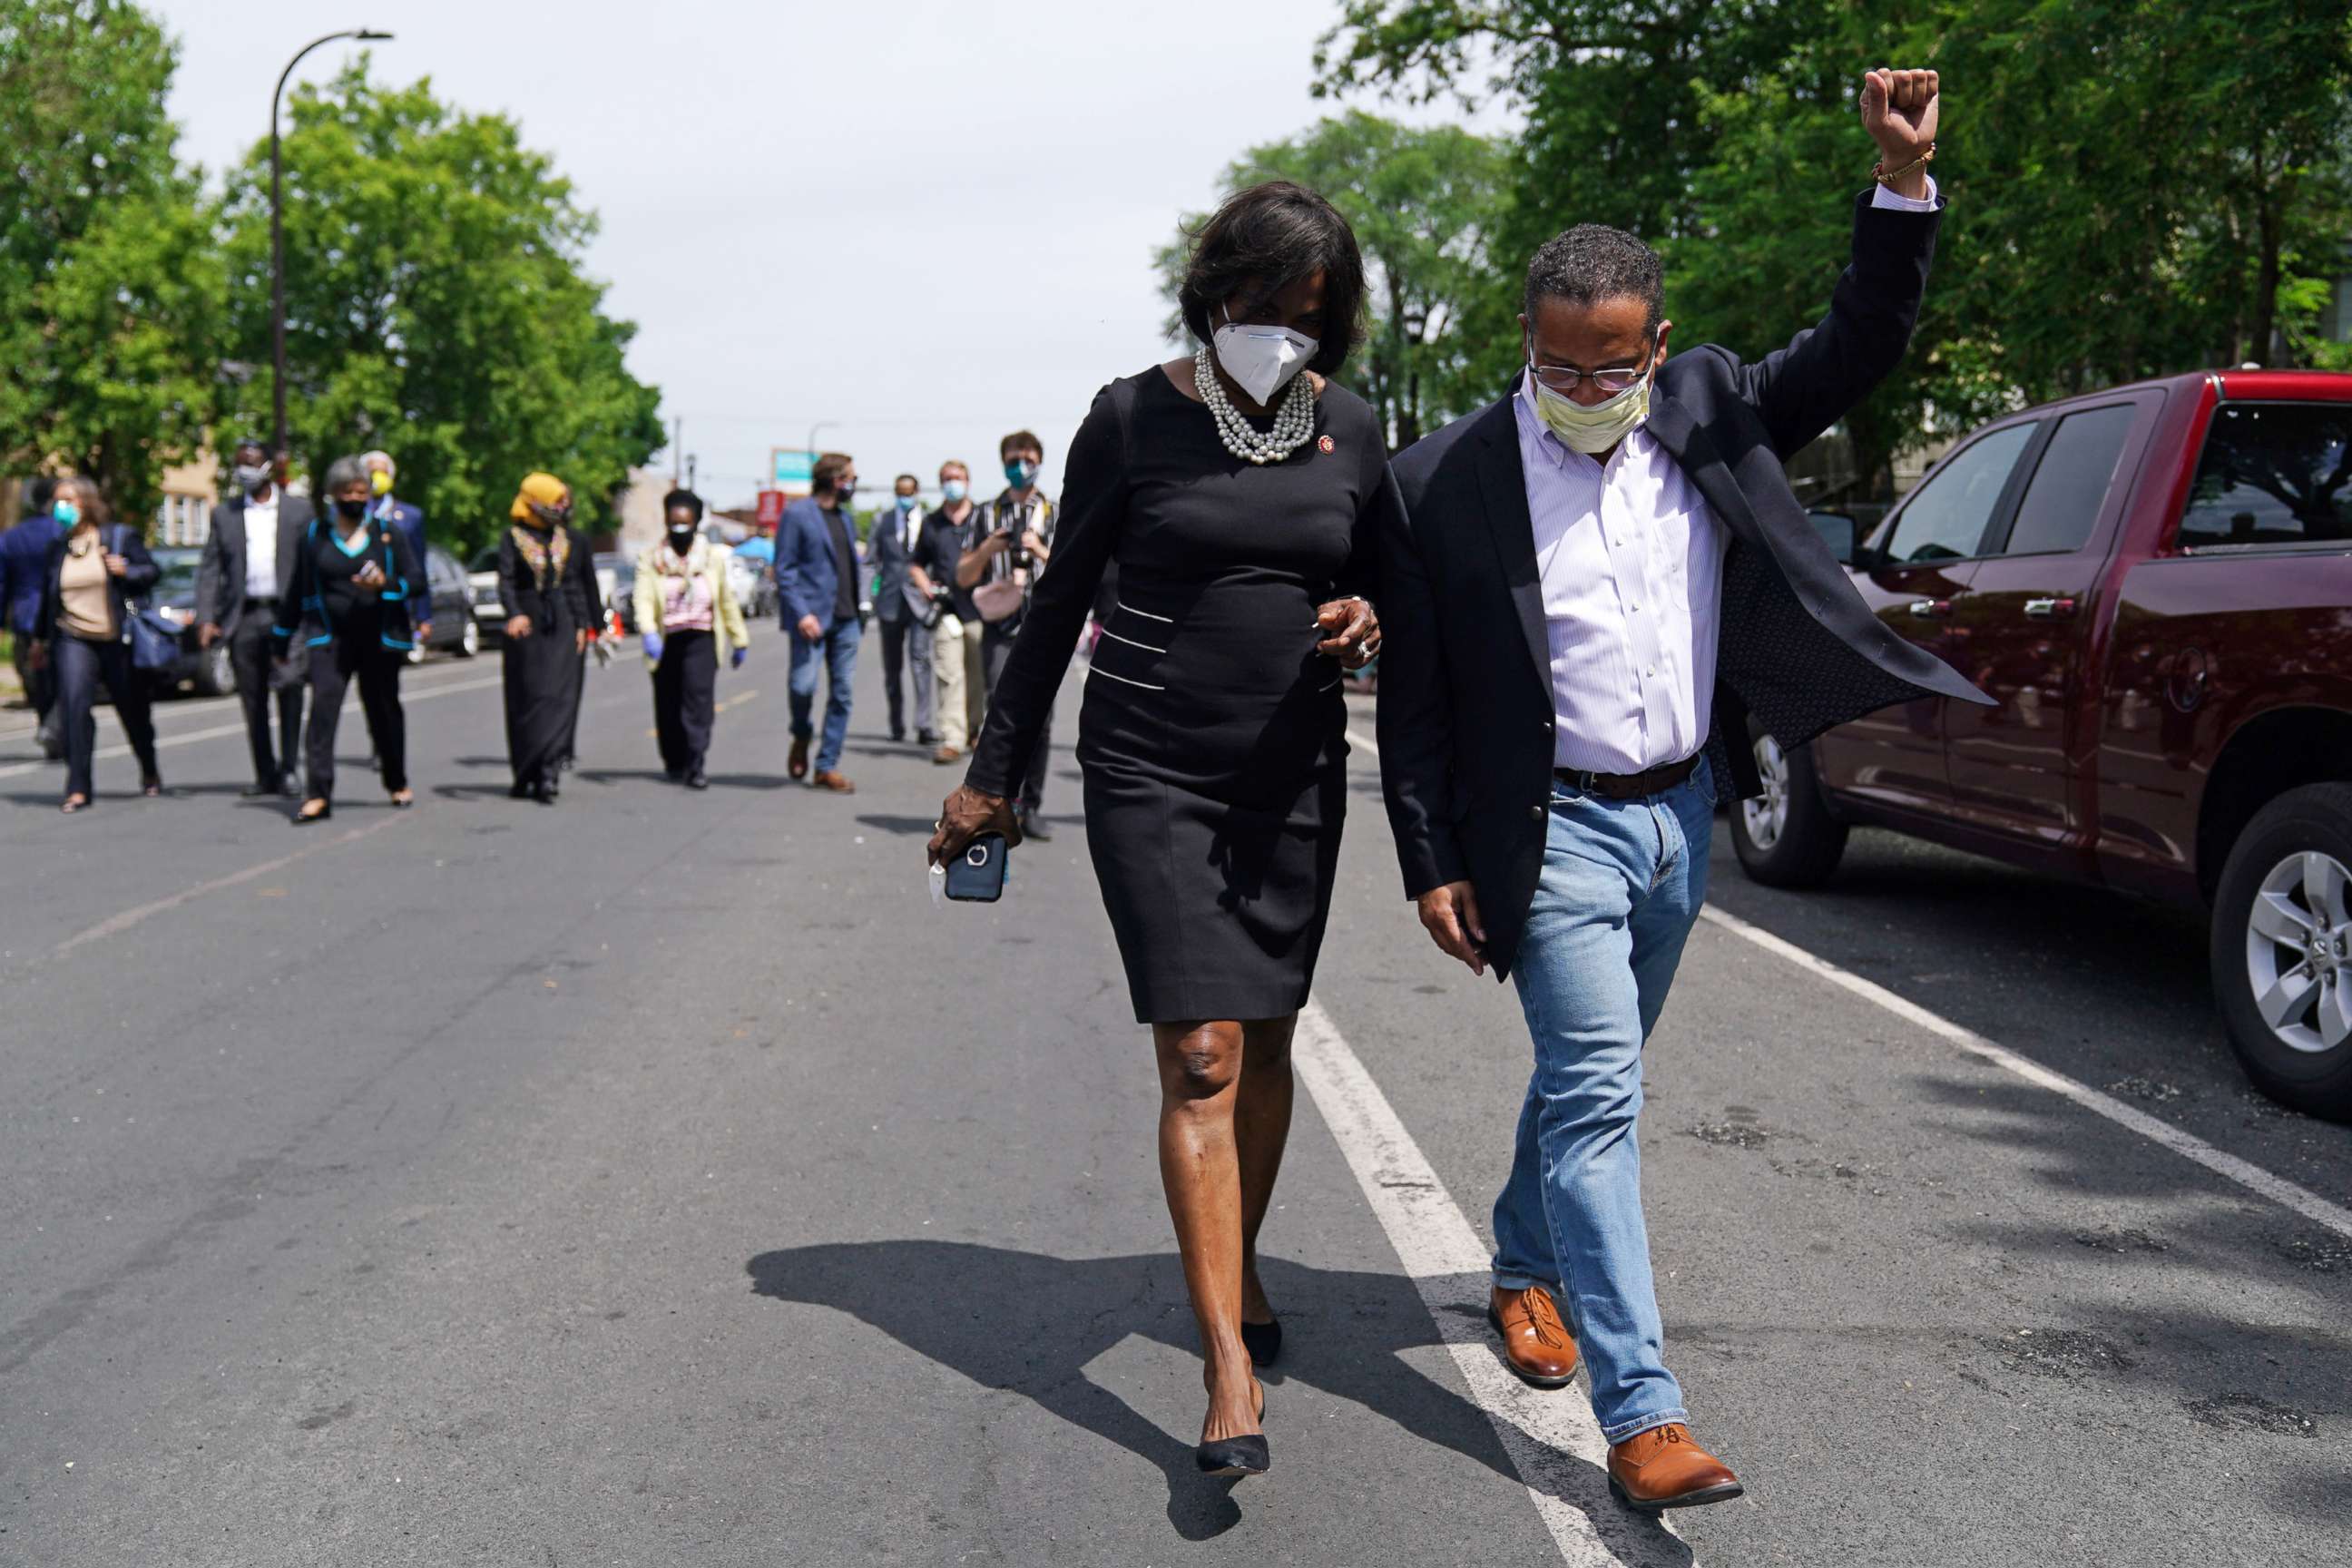 PHOTO: State Attorney General Keith Ellison pumped his fist to cheers from onlookers after he and members of the United States Congressional Black Caucus visited the site of George Floyd's death, June 4, 2020, in south Minneapolis.